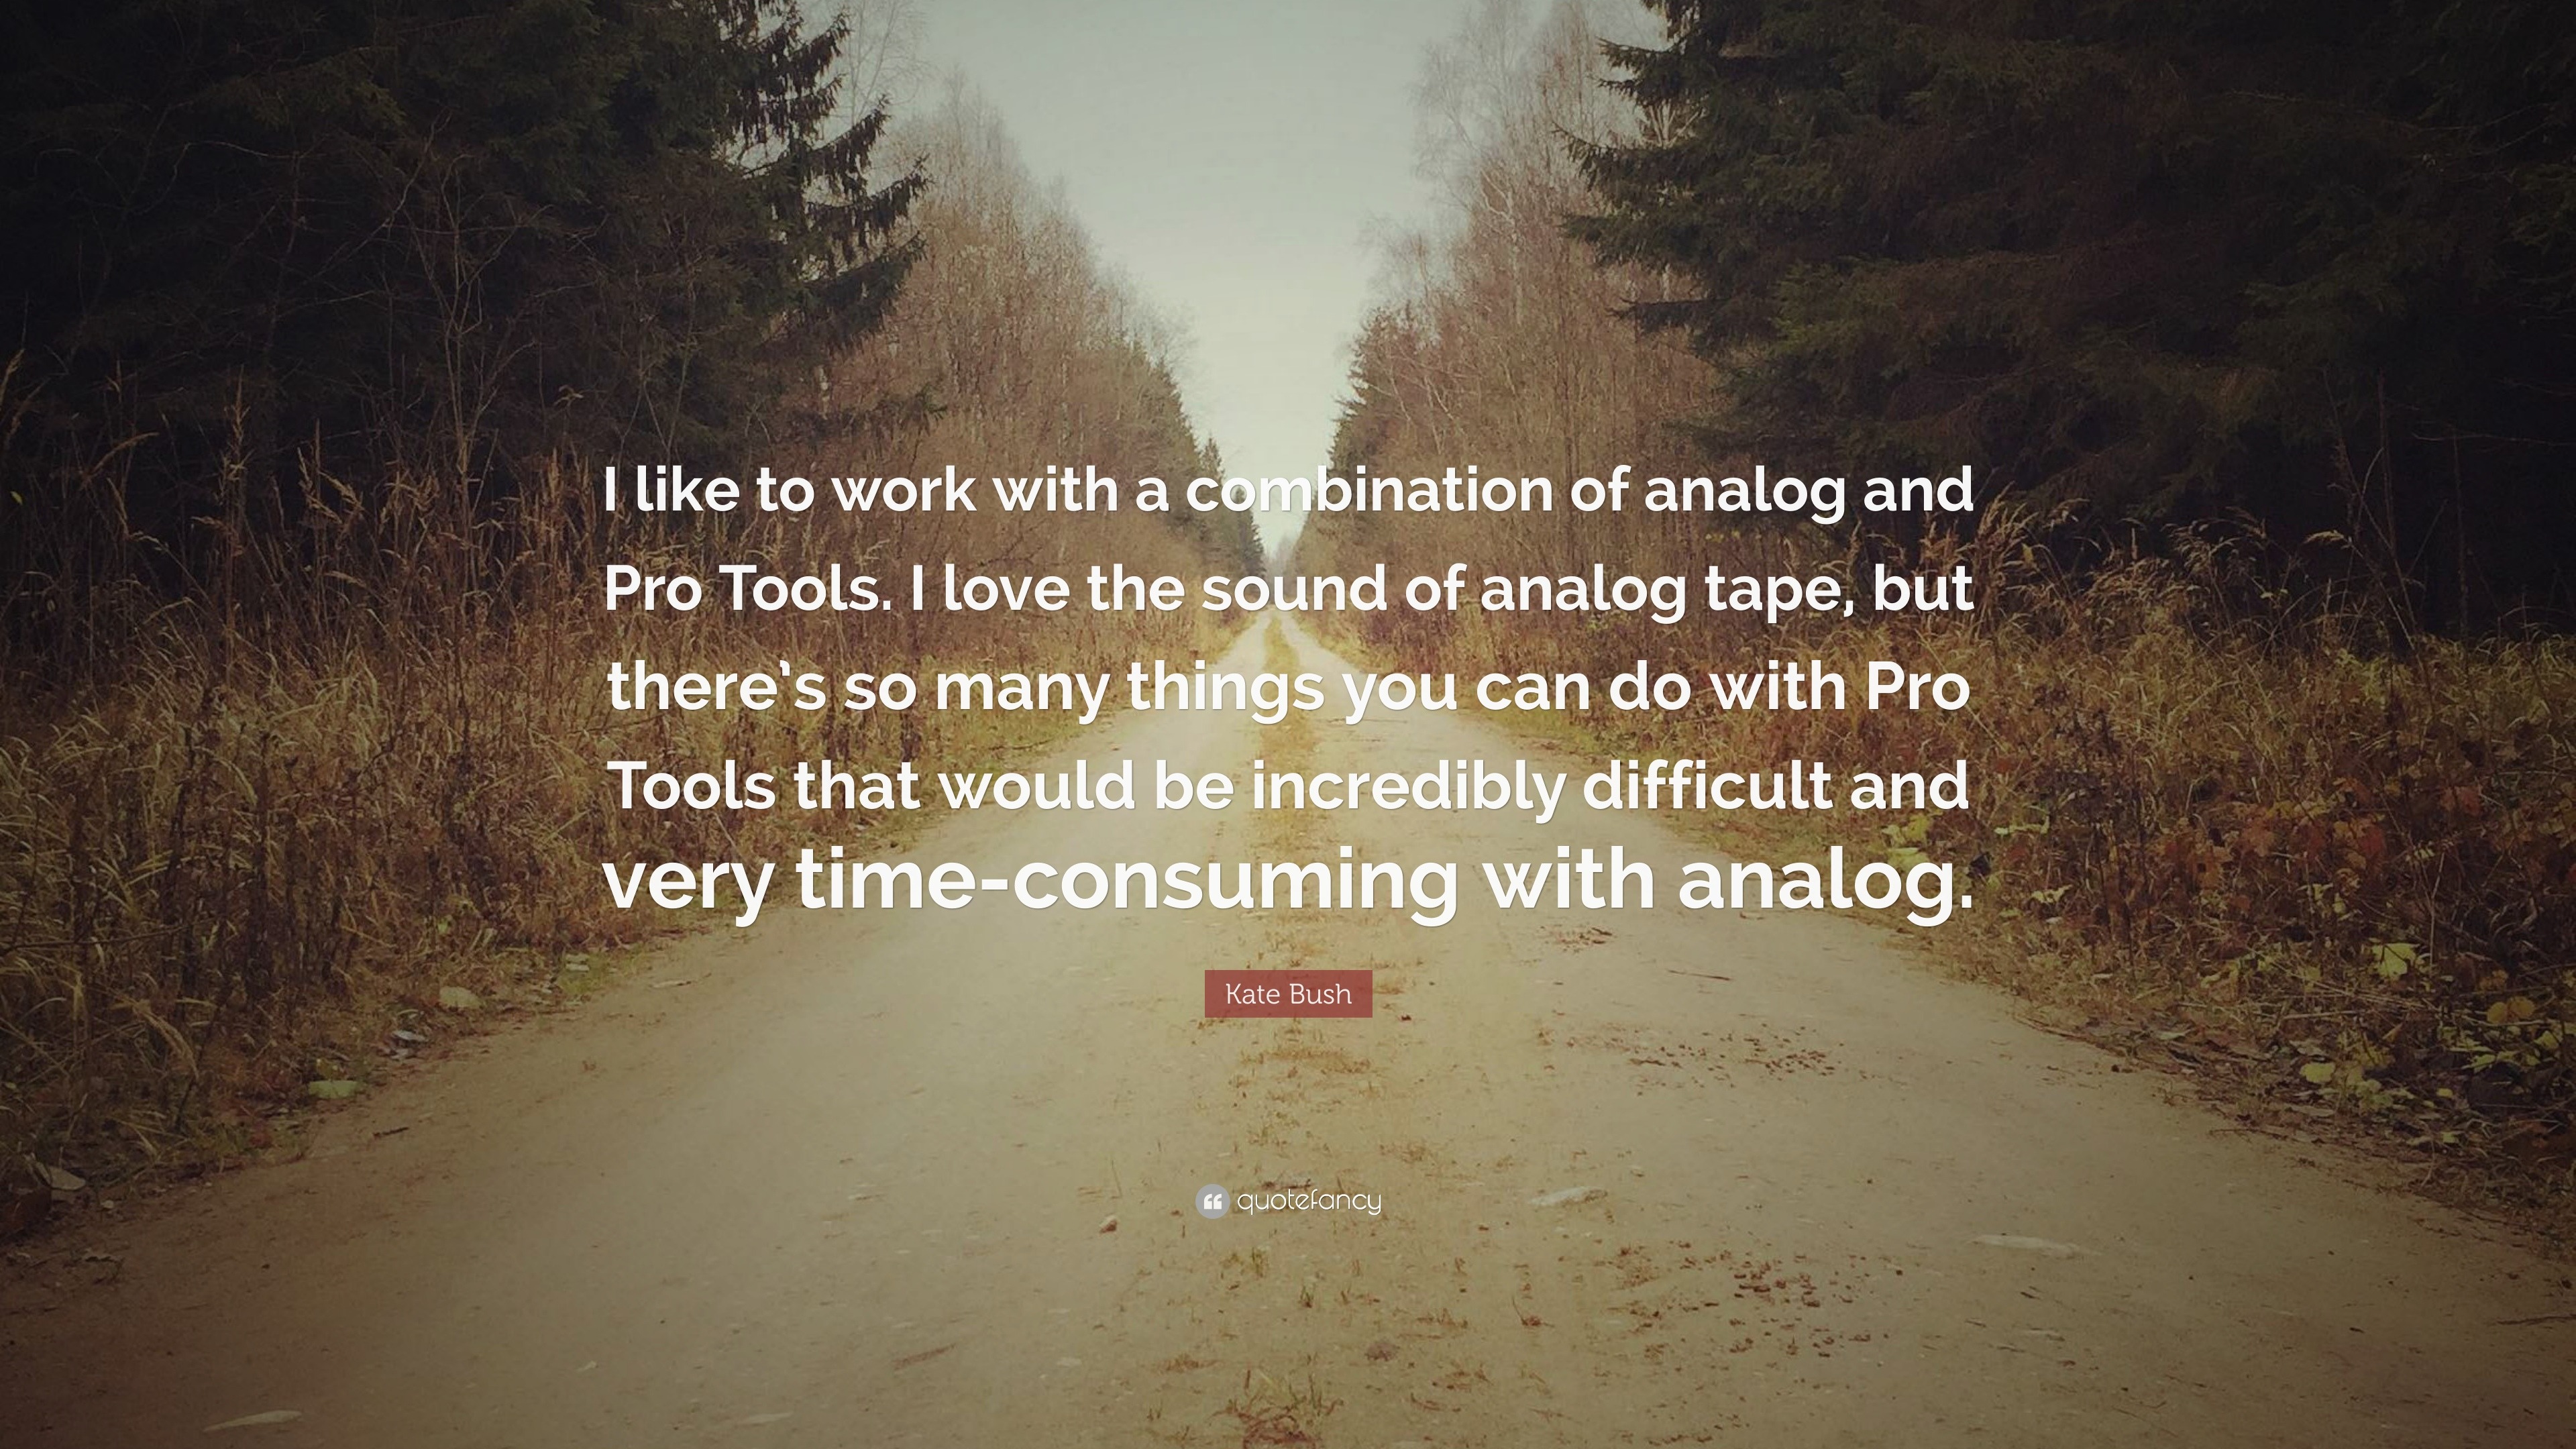 Kate Bush Quote: "I like to work with a combination of analog and Pro Tools. I love the sound of ...